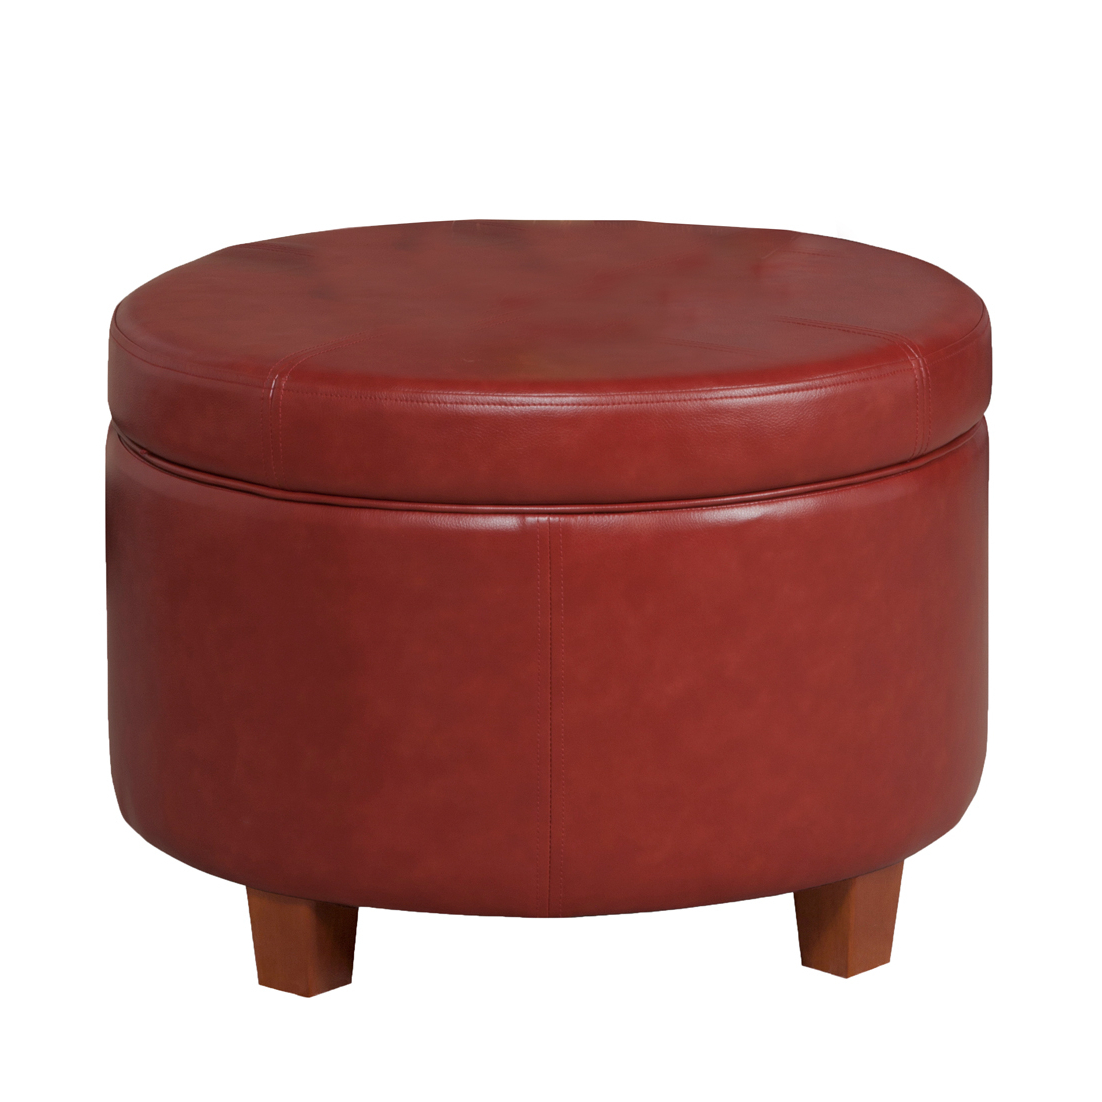 Leatherette Upholstered Wooden Ottoman With Single Button Tufted Lift Top Storage, Red, Large- Saltoro Sherpi